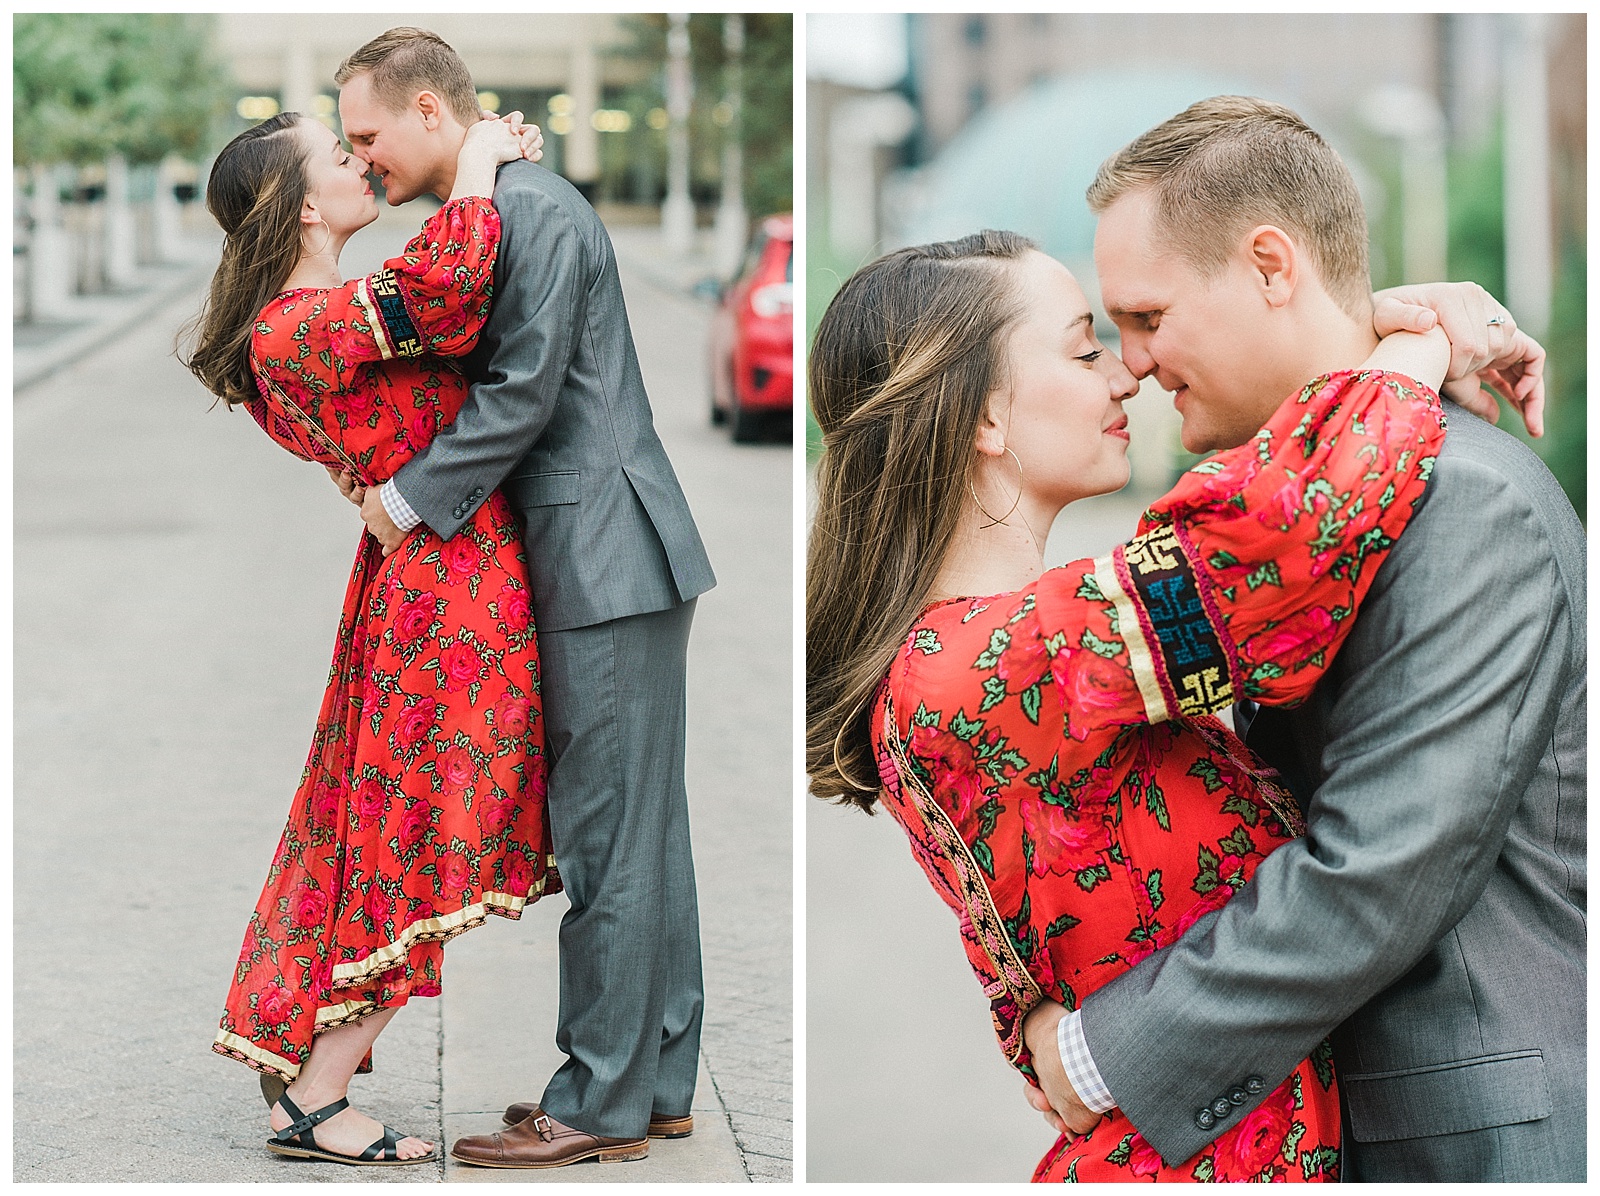 dallas_arts_district_white_rock_lakeengagement_sessionCourtney+Andy27.jpg